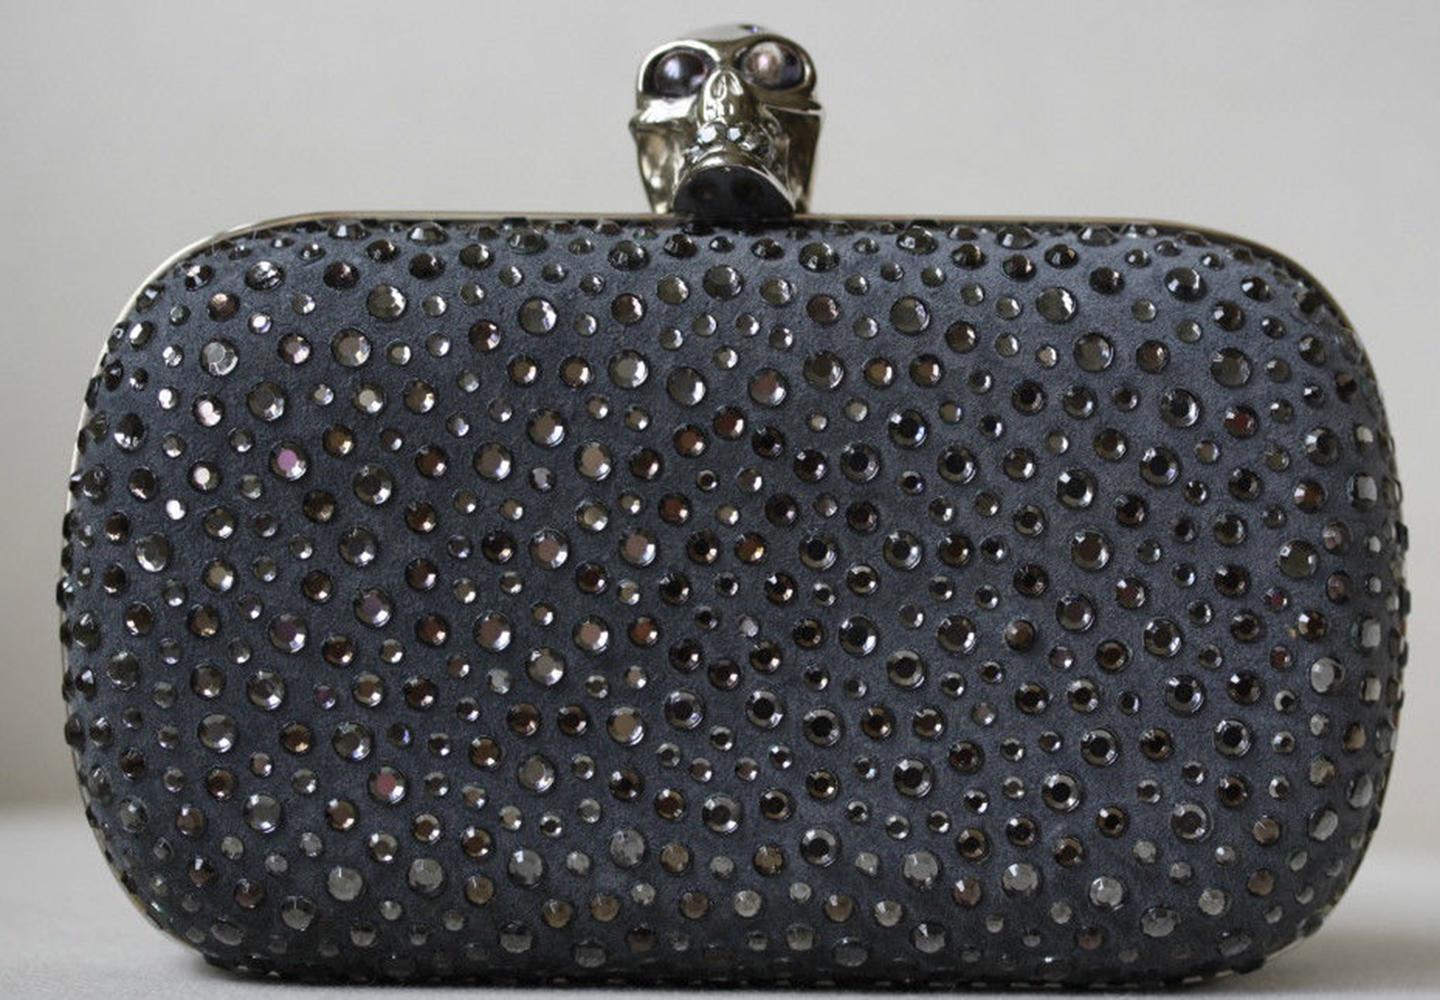 Get a rocker chic look with this edgy Alexander McQueen black crystal skull clutch. It will definitely style up any evening outfit. It features gorgeous grey crystal embellishments all over the exterior of the clutch, and a silver-tone skull on top